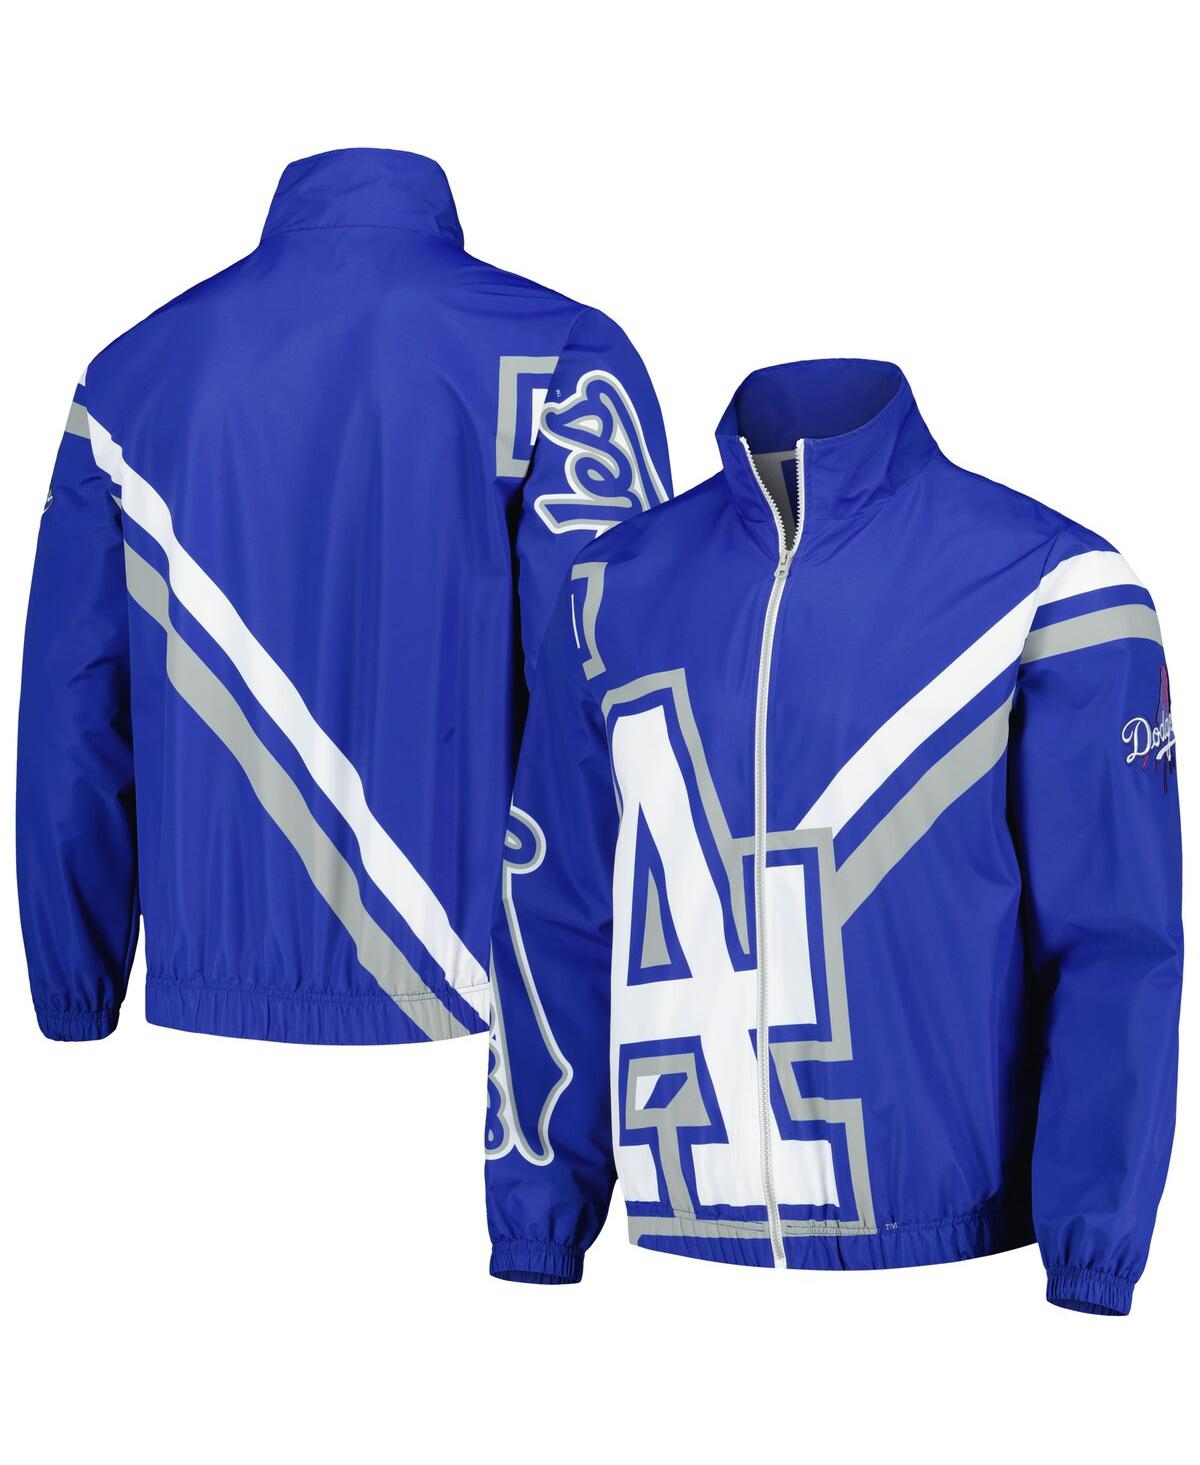 Shop Mitchell & Ness Men's  Royal Los Angeles Dodgers Exploded Logo Warm Up Full-zip Jacket